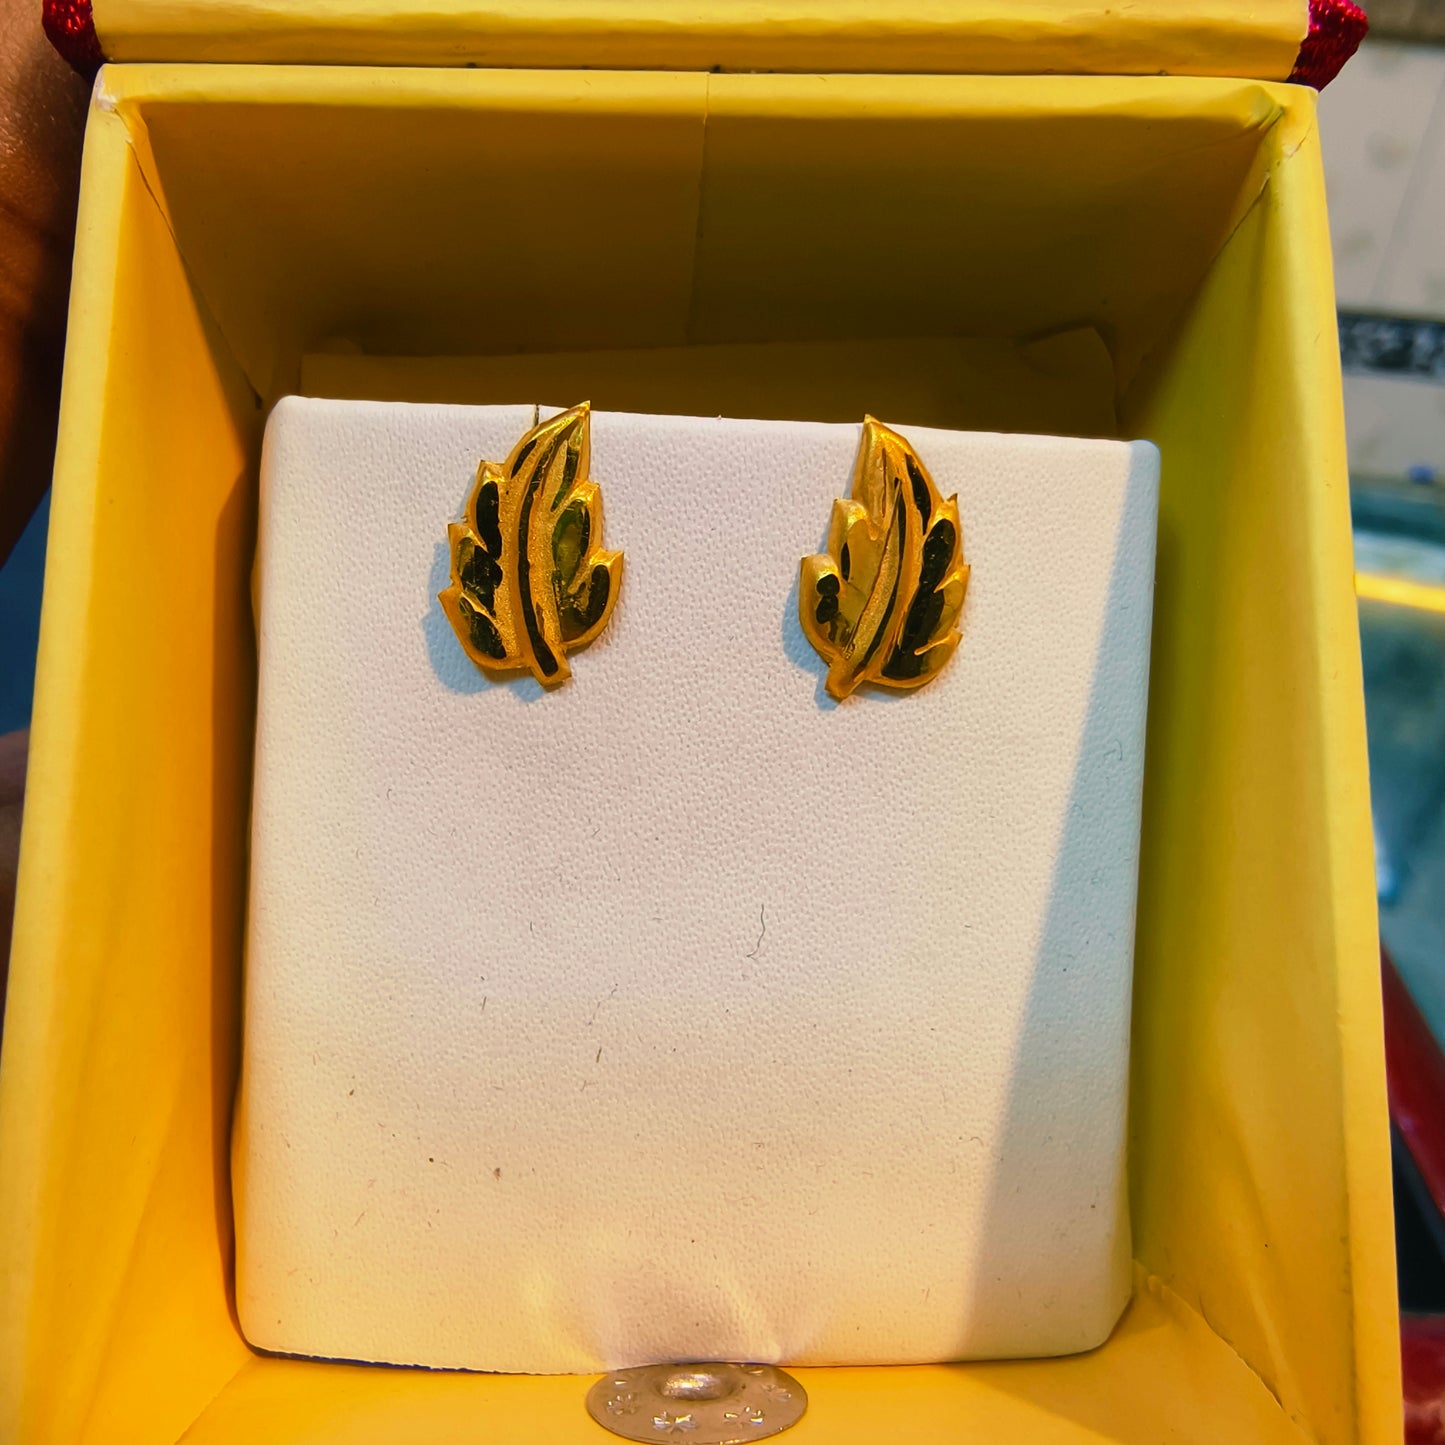 KDM GOLD EAR TOPS FOR GIFT PURPOSE IN MARRIAGE AND ANNIVERSARY 1 PAIR APPROX WGT: 0.240 GM